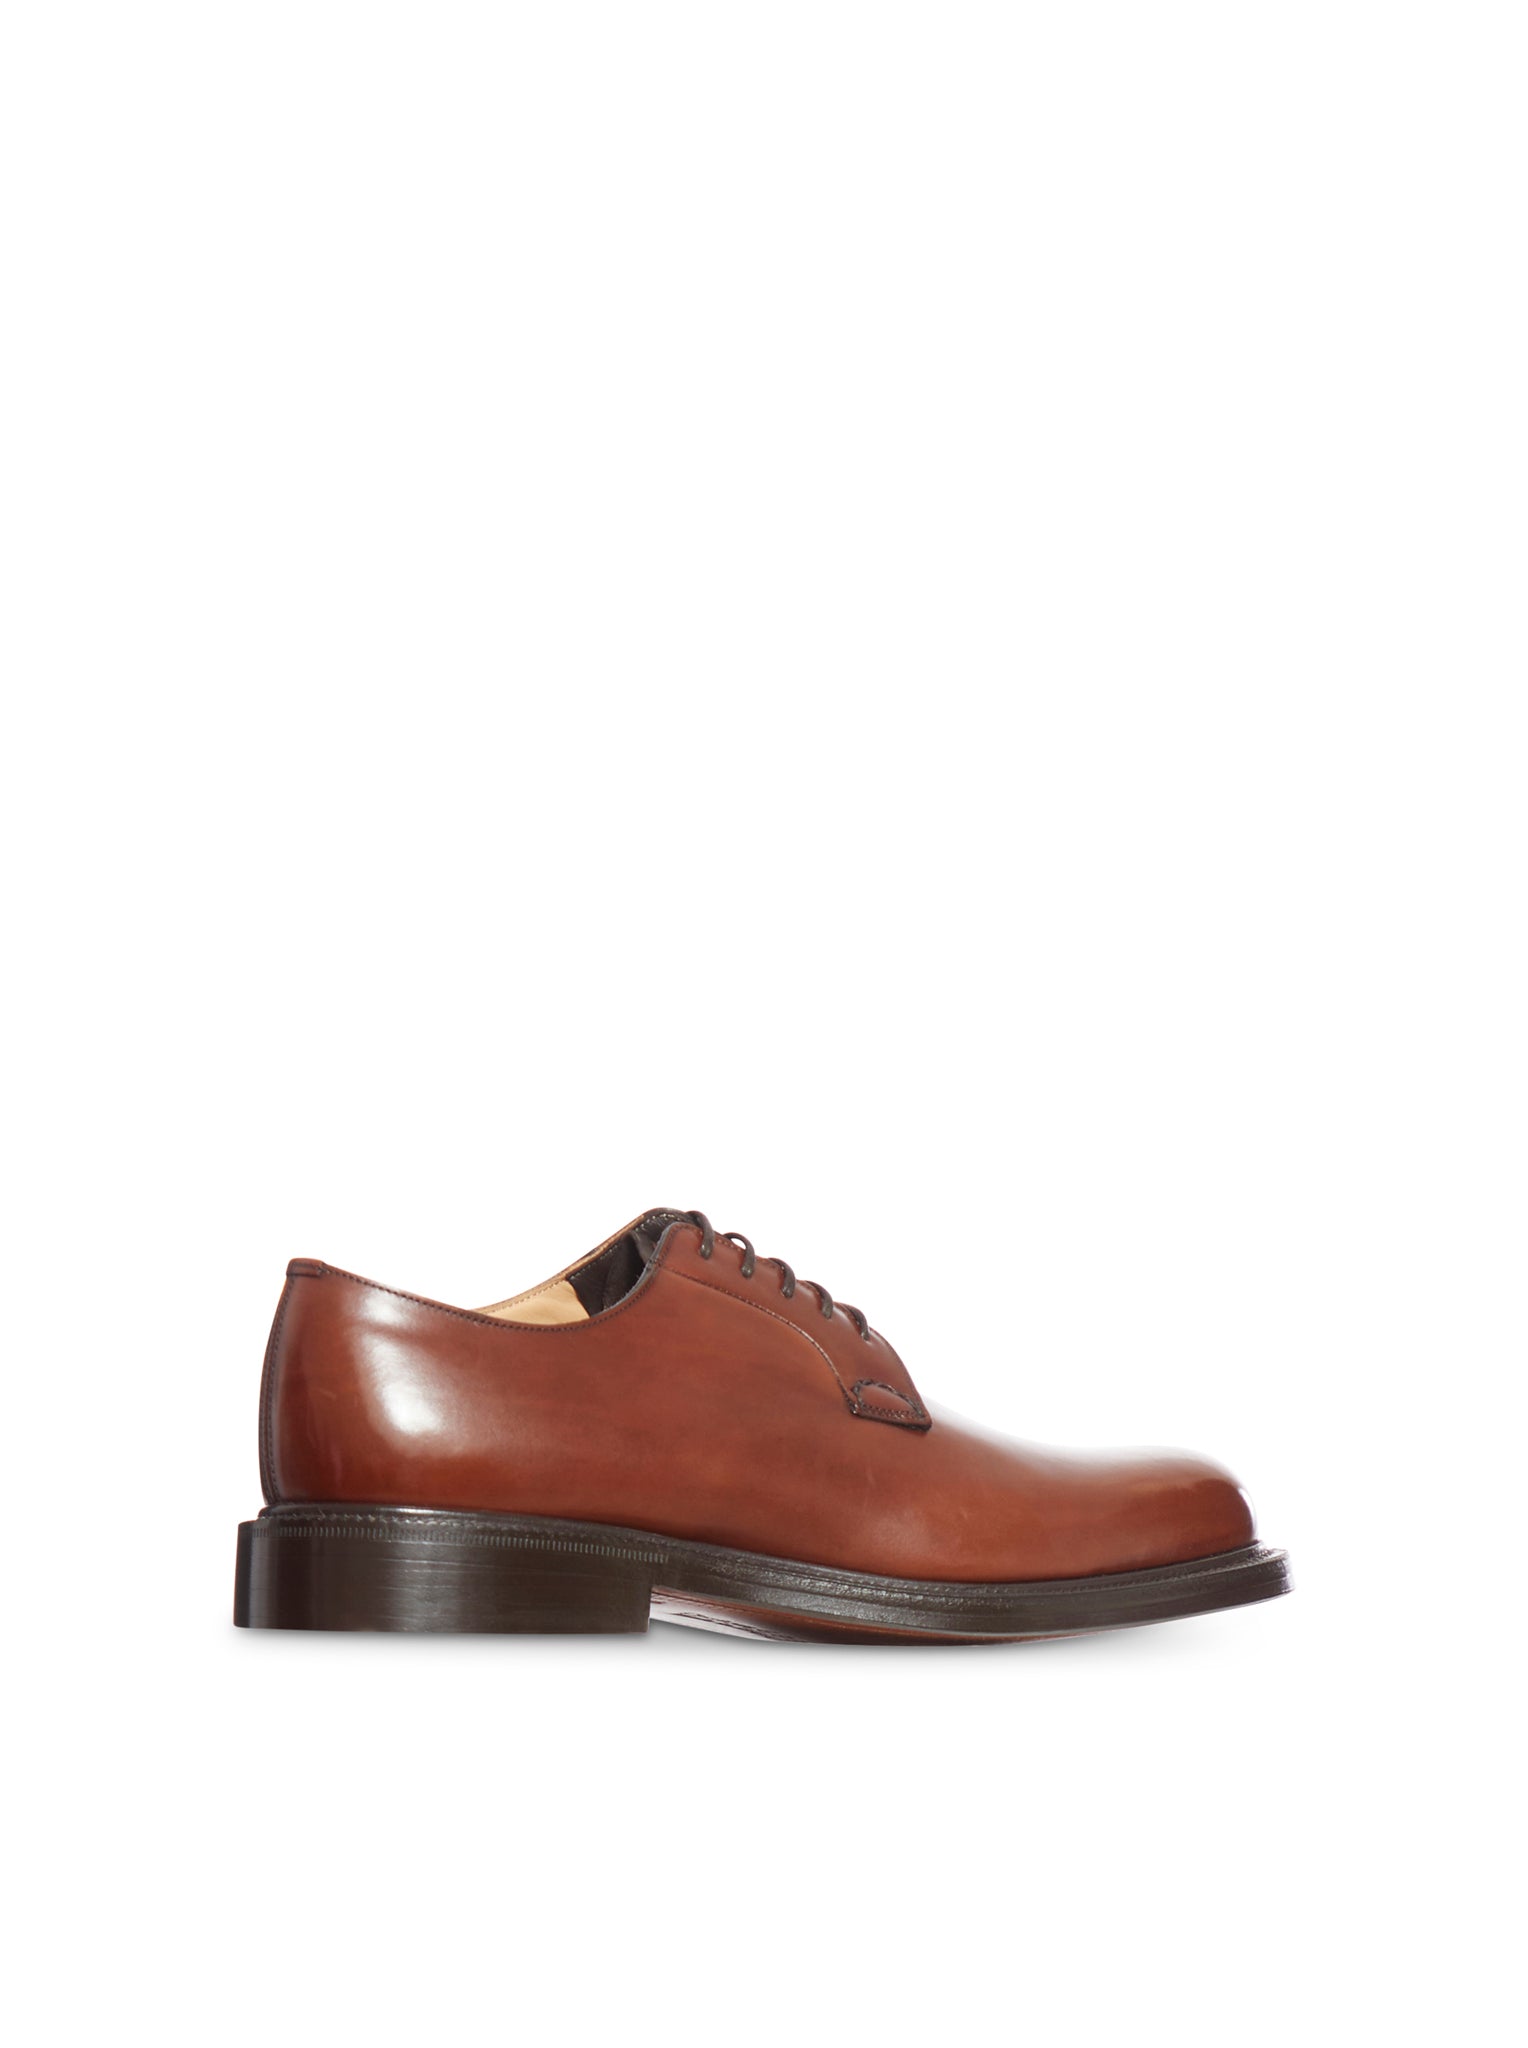 Shannon leather Derby shoes